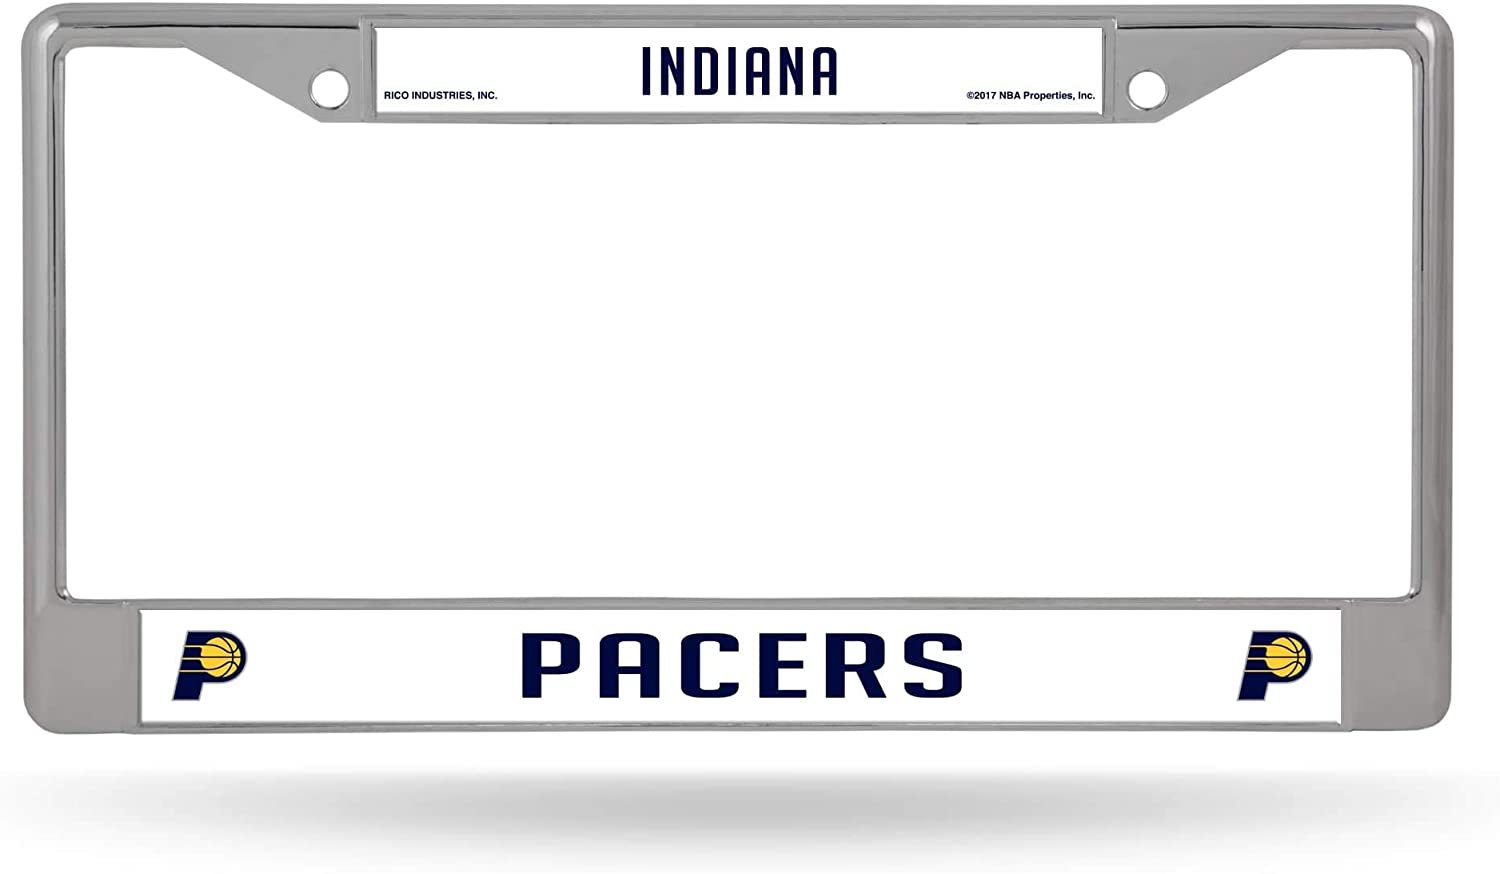 Indiana Pacers Premium Metal License License Plate Frame Chrome Tag Cover, 12x6 Inch